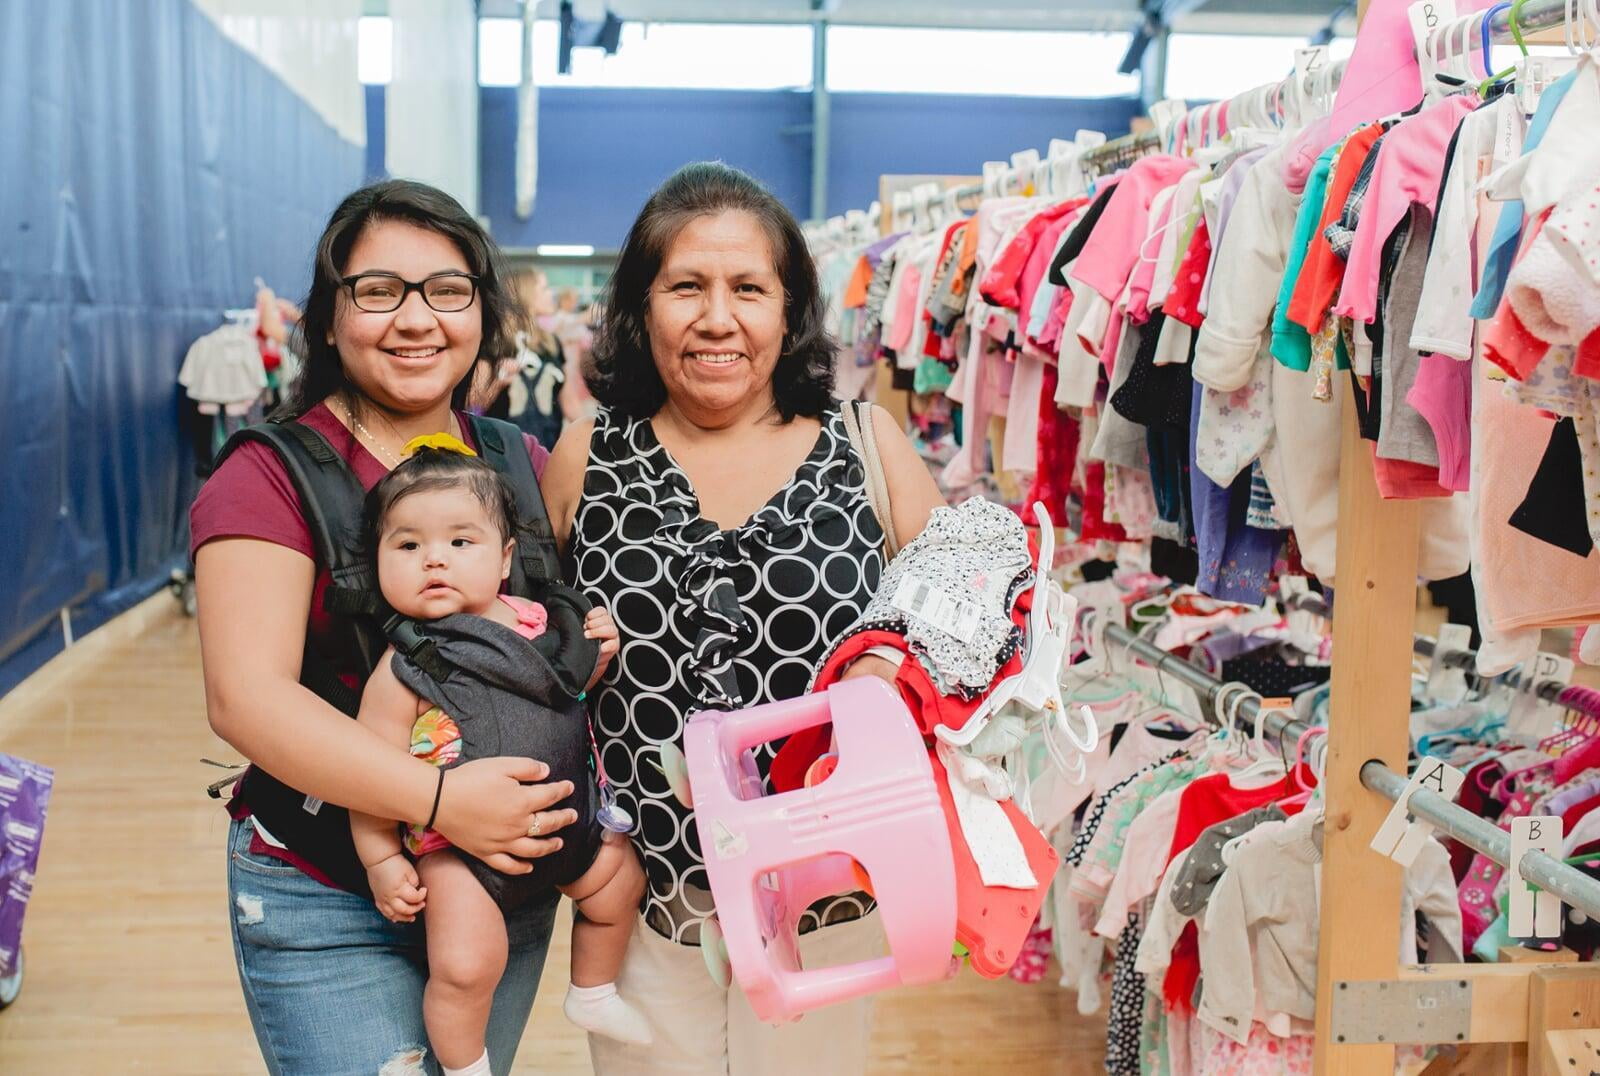 A mom, abuela and granddaughter attend a JBF sale. Abuela is holding a babyseat.